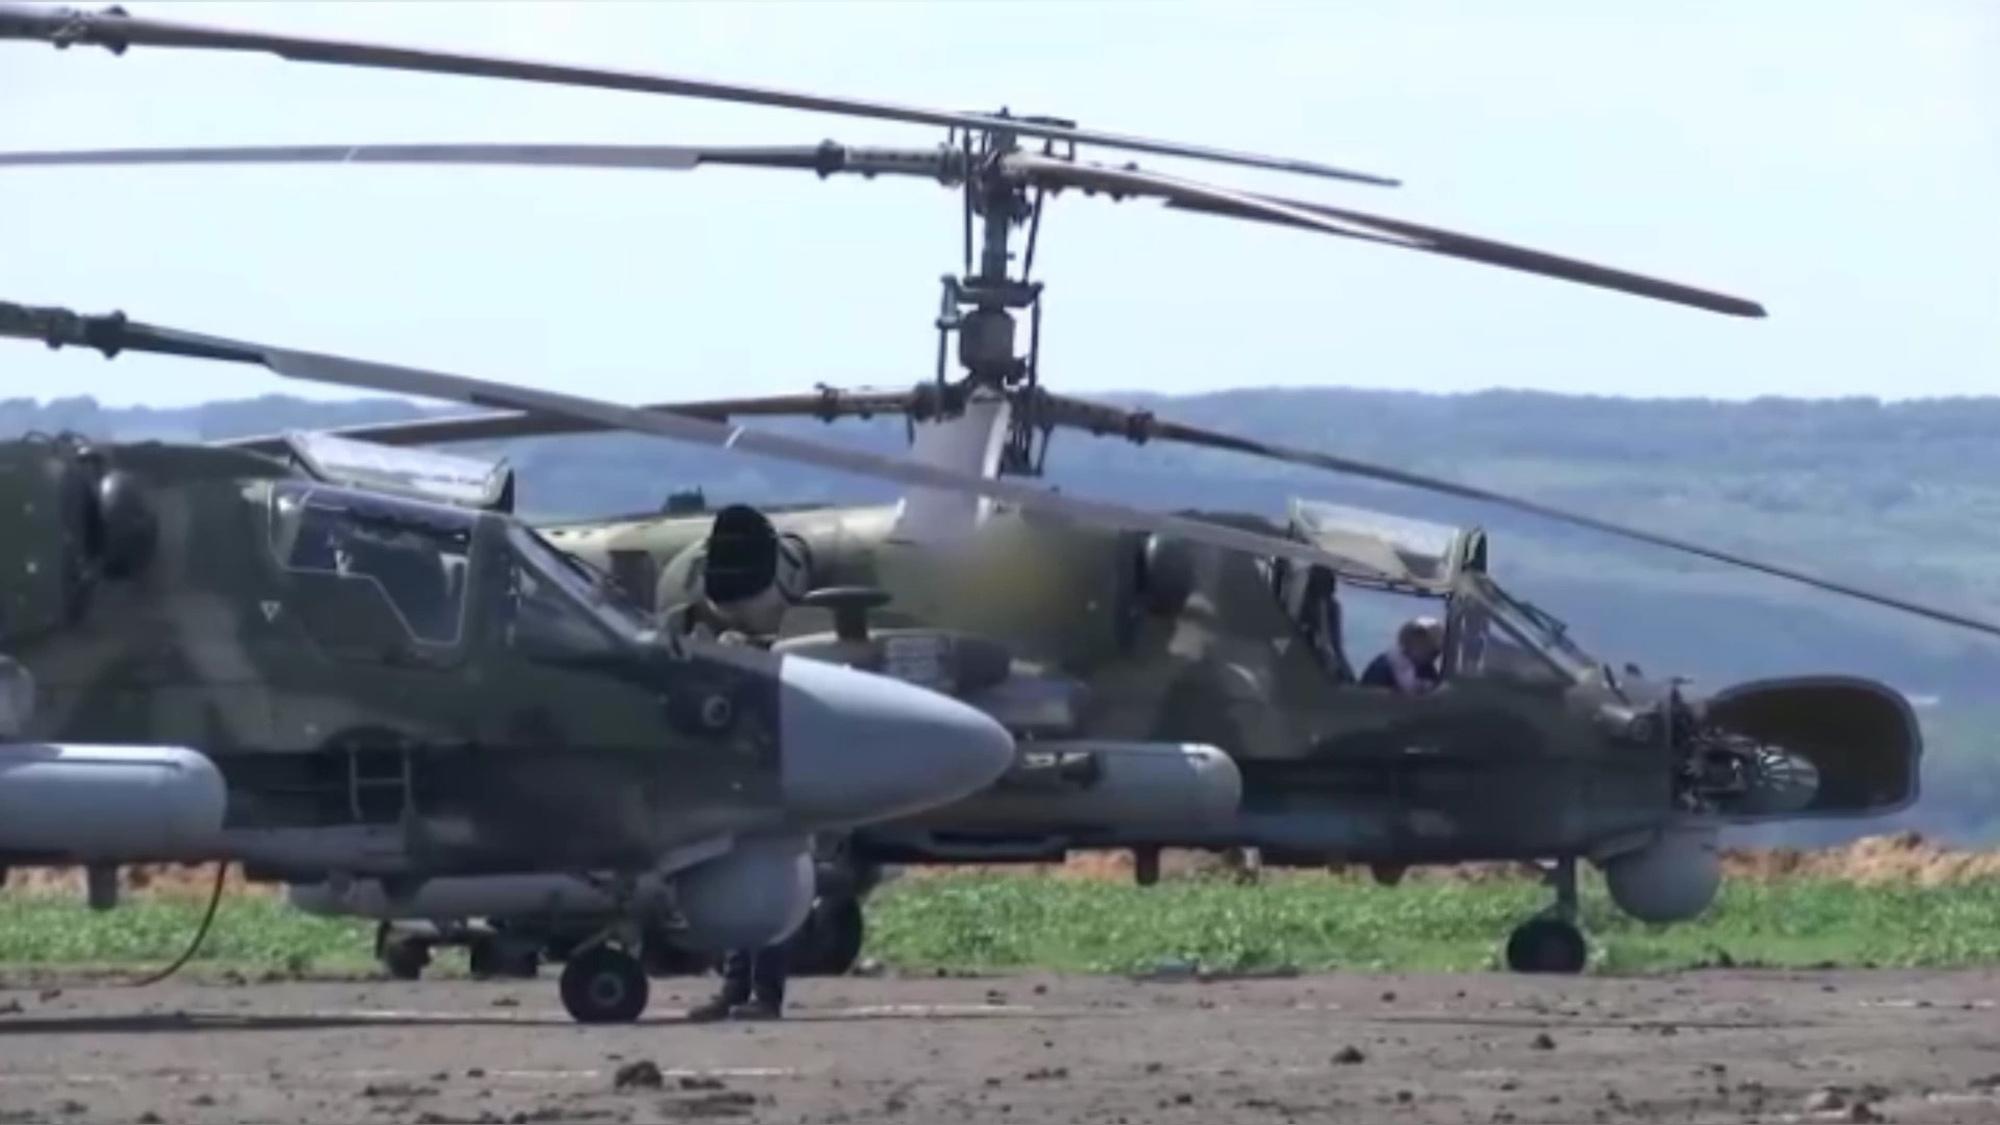 Read more about the article WAR IN UKRAINE: Russia Showcases Ka-52 Alligator Attack Helicopter After Ukrainians Knock One Out Of Sky